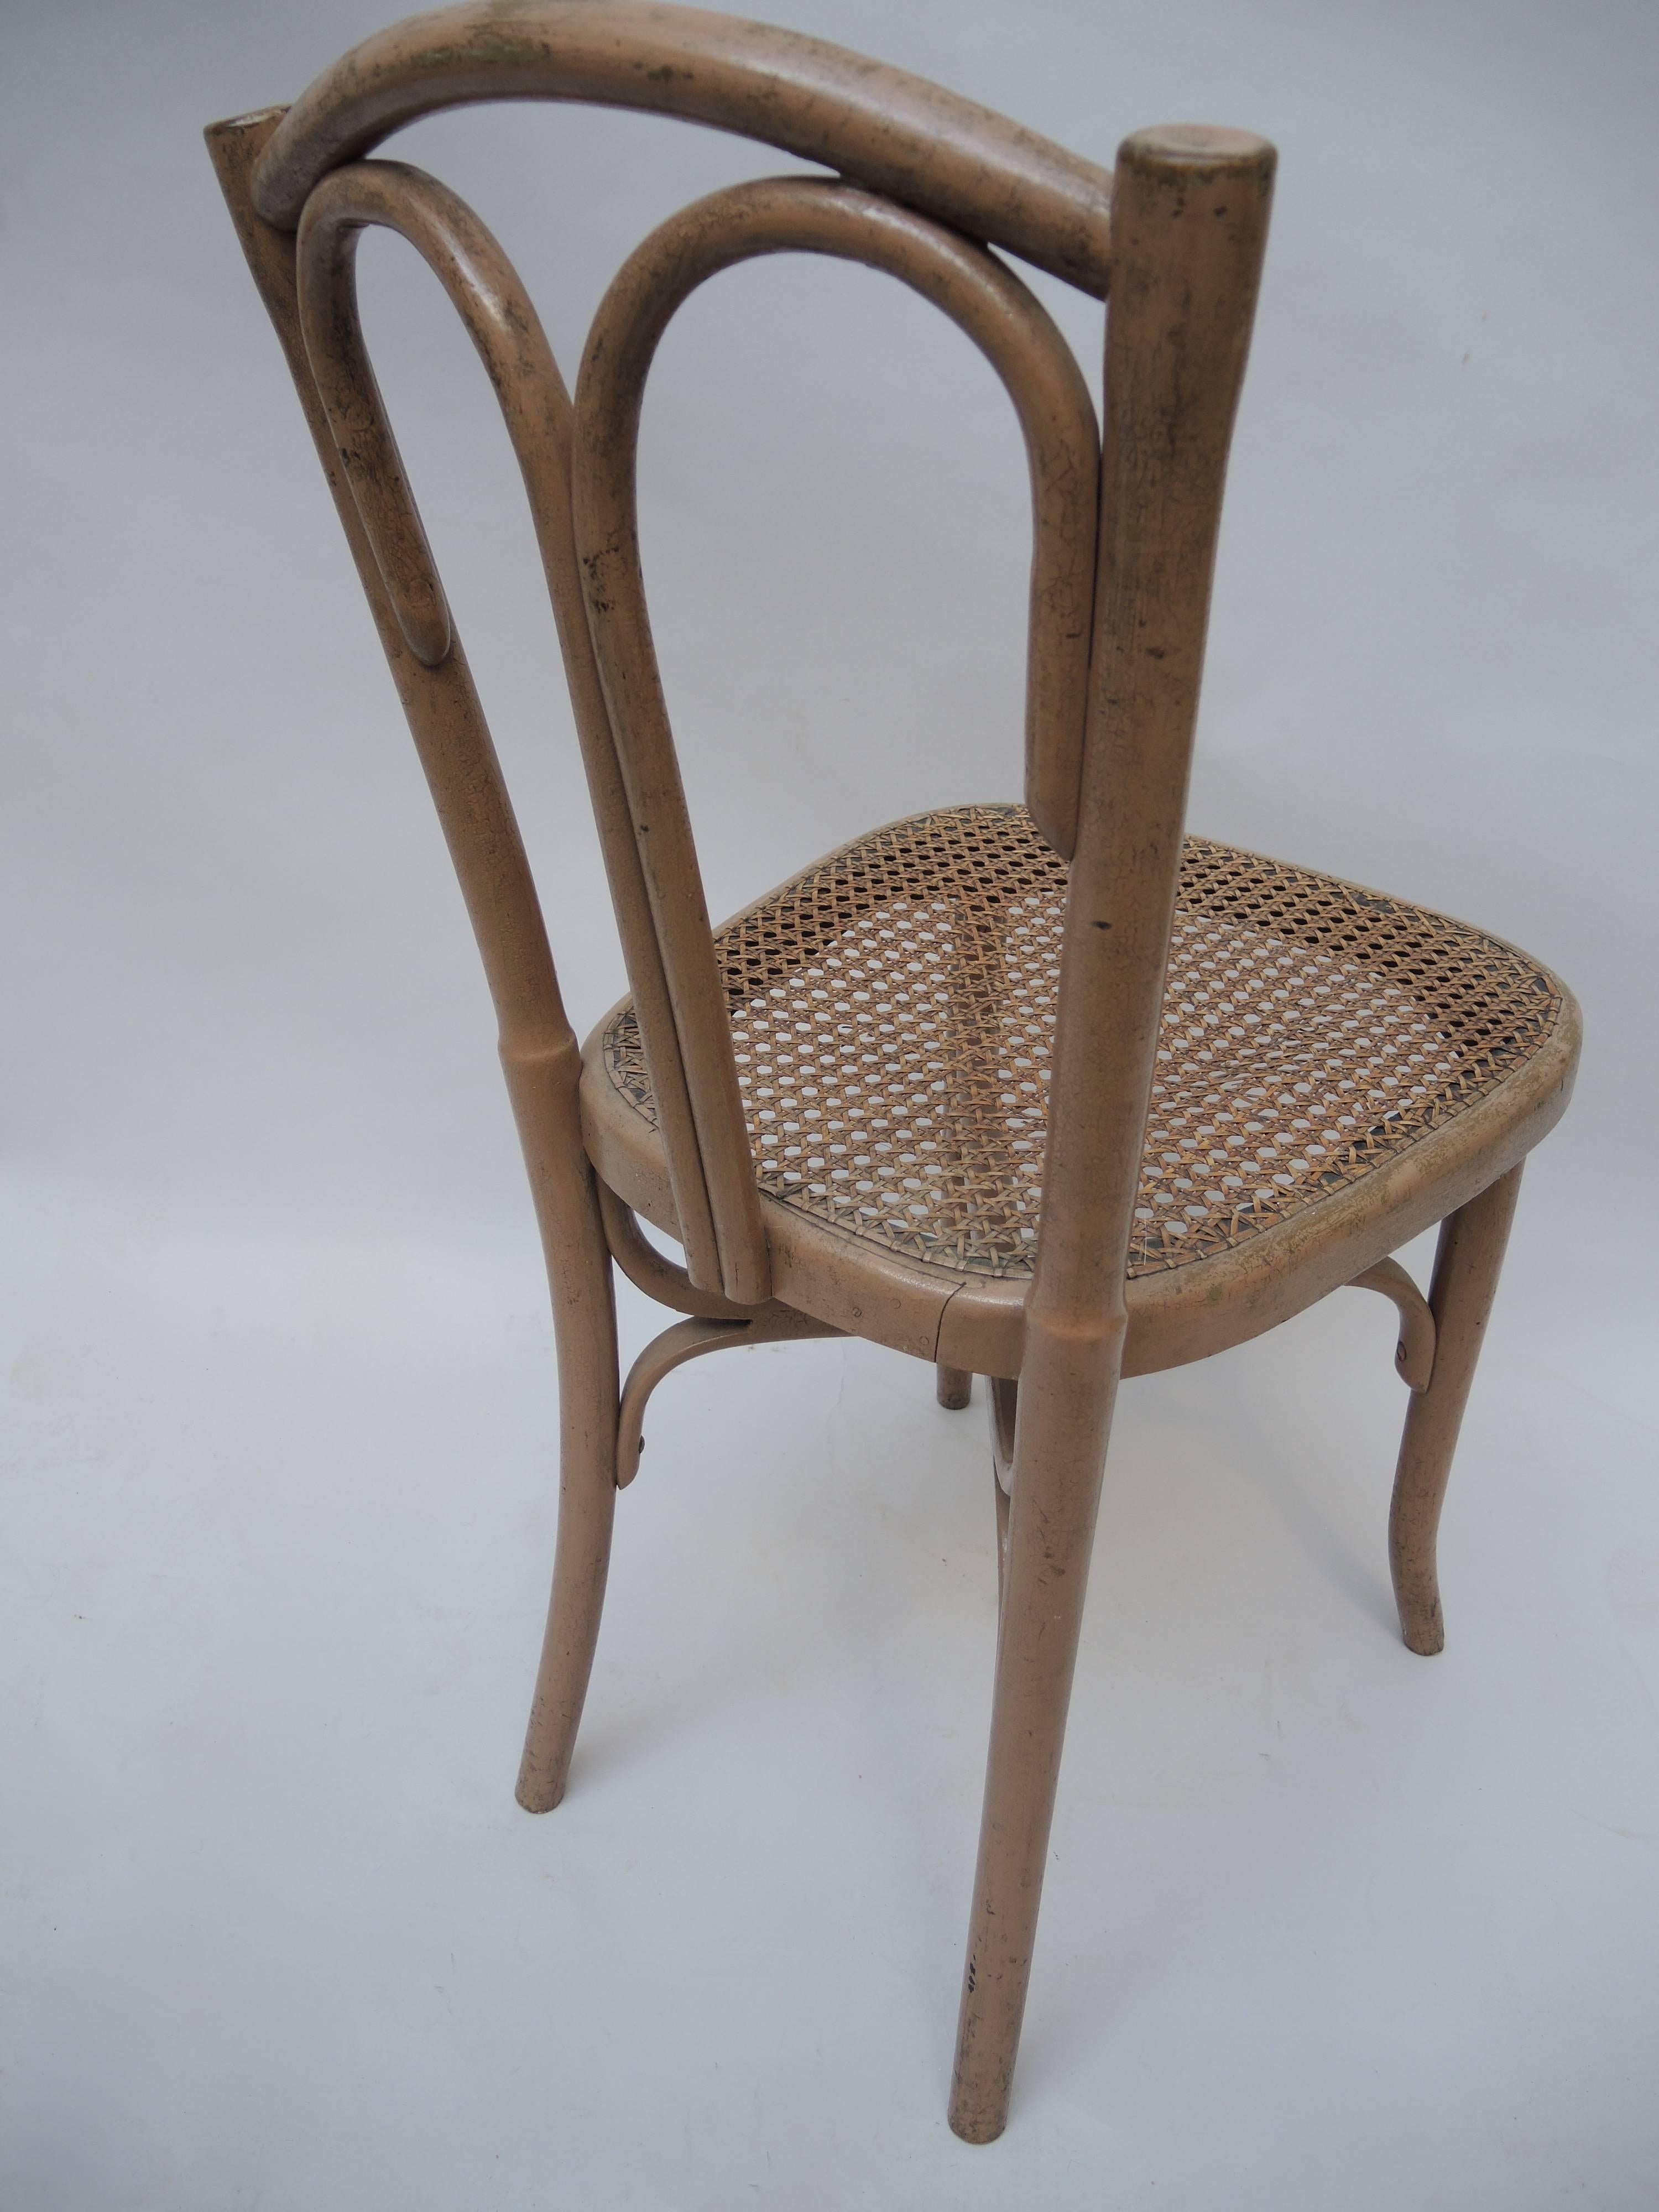 A Belgian bentwood cafe chair retaining the original paint and cane seat. Made by Cambier Freres (Ath, BELGIUM)end of the 19th century, 1889. Stamped CAMBIER on the frame.
  